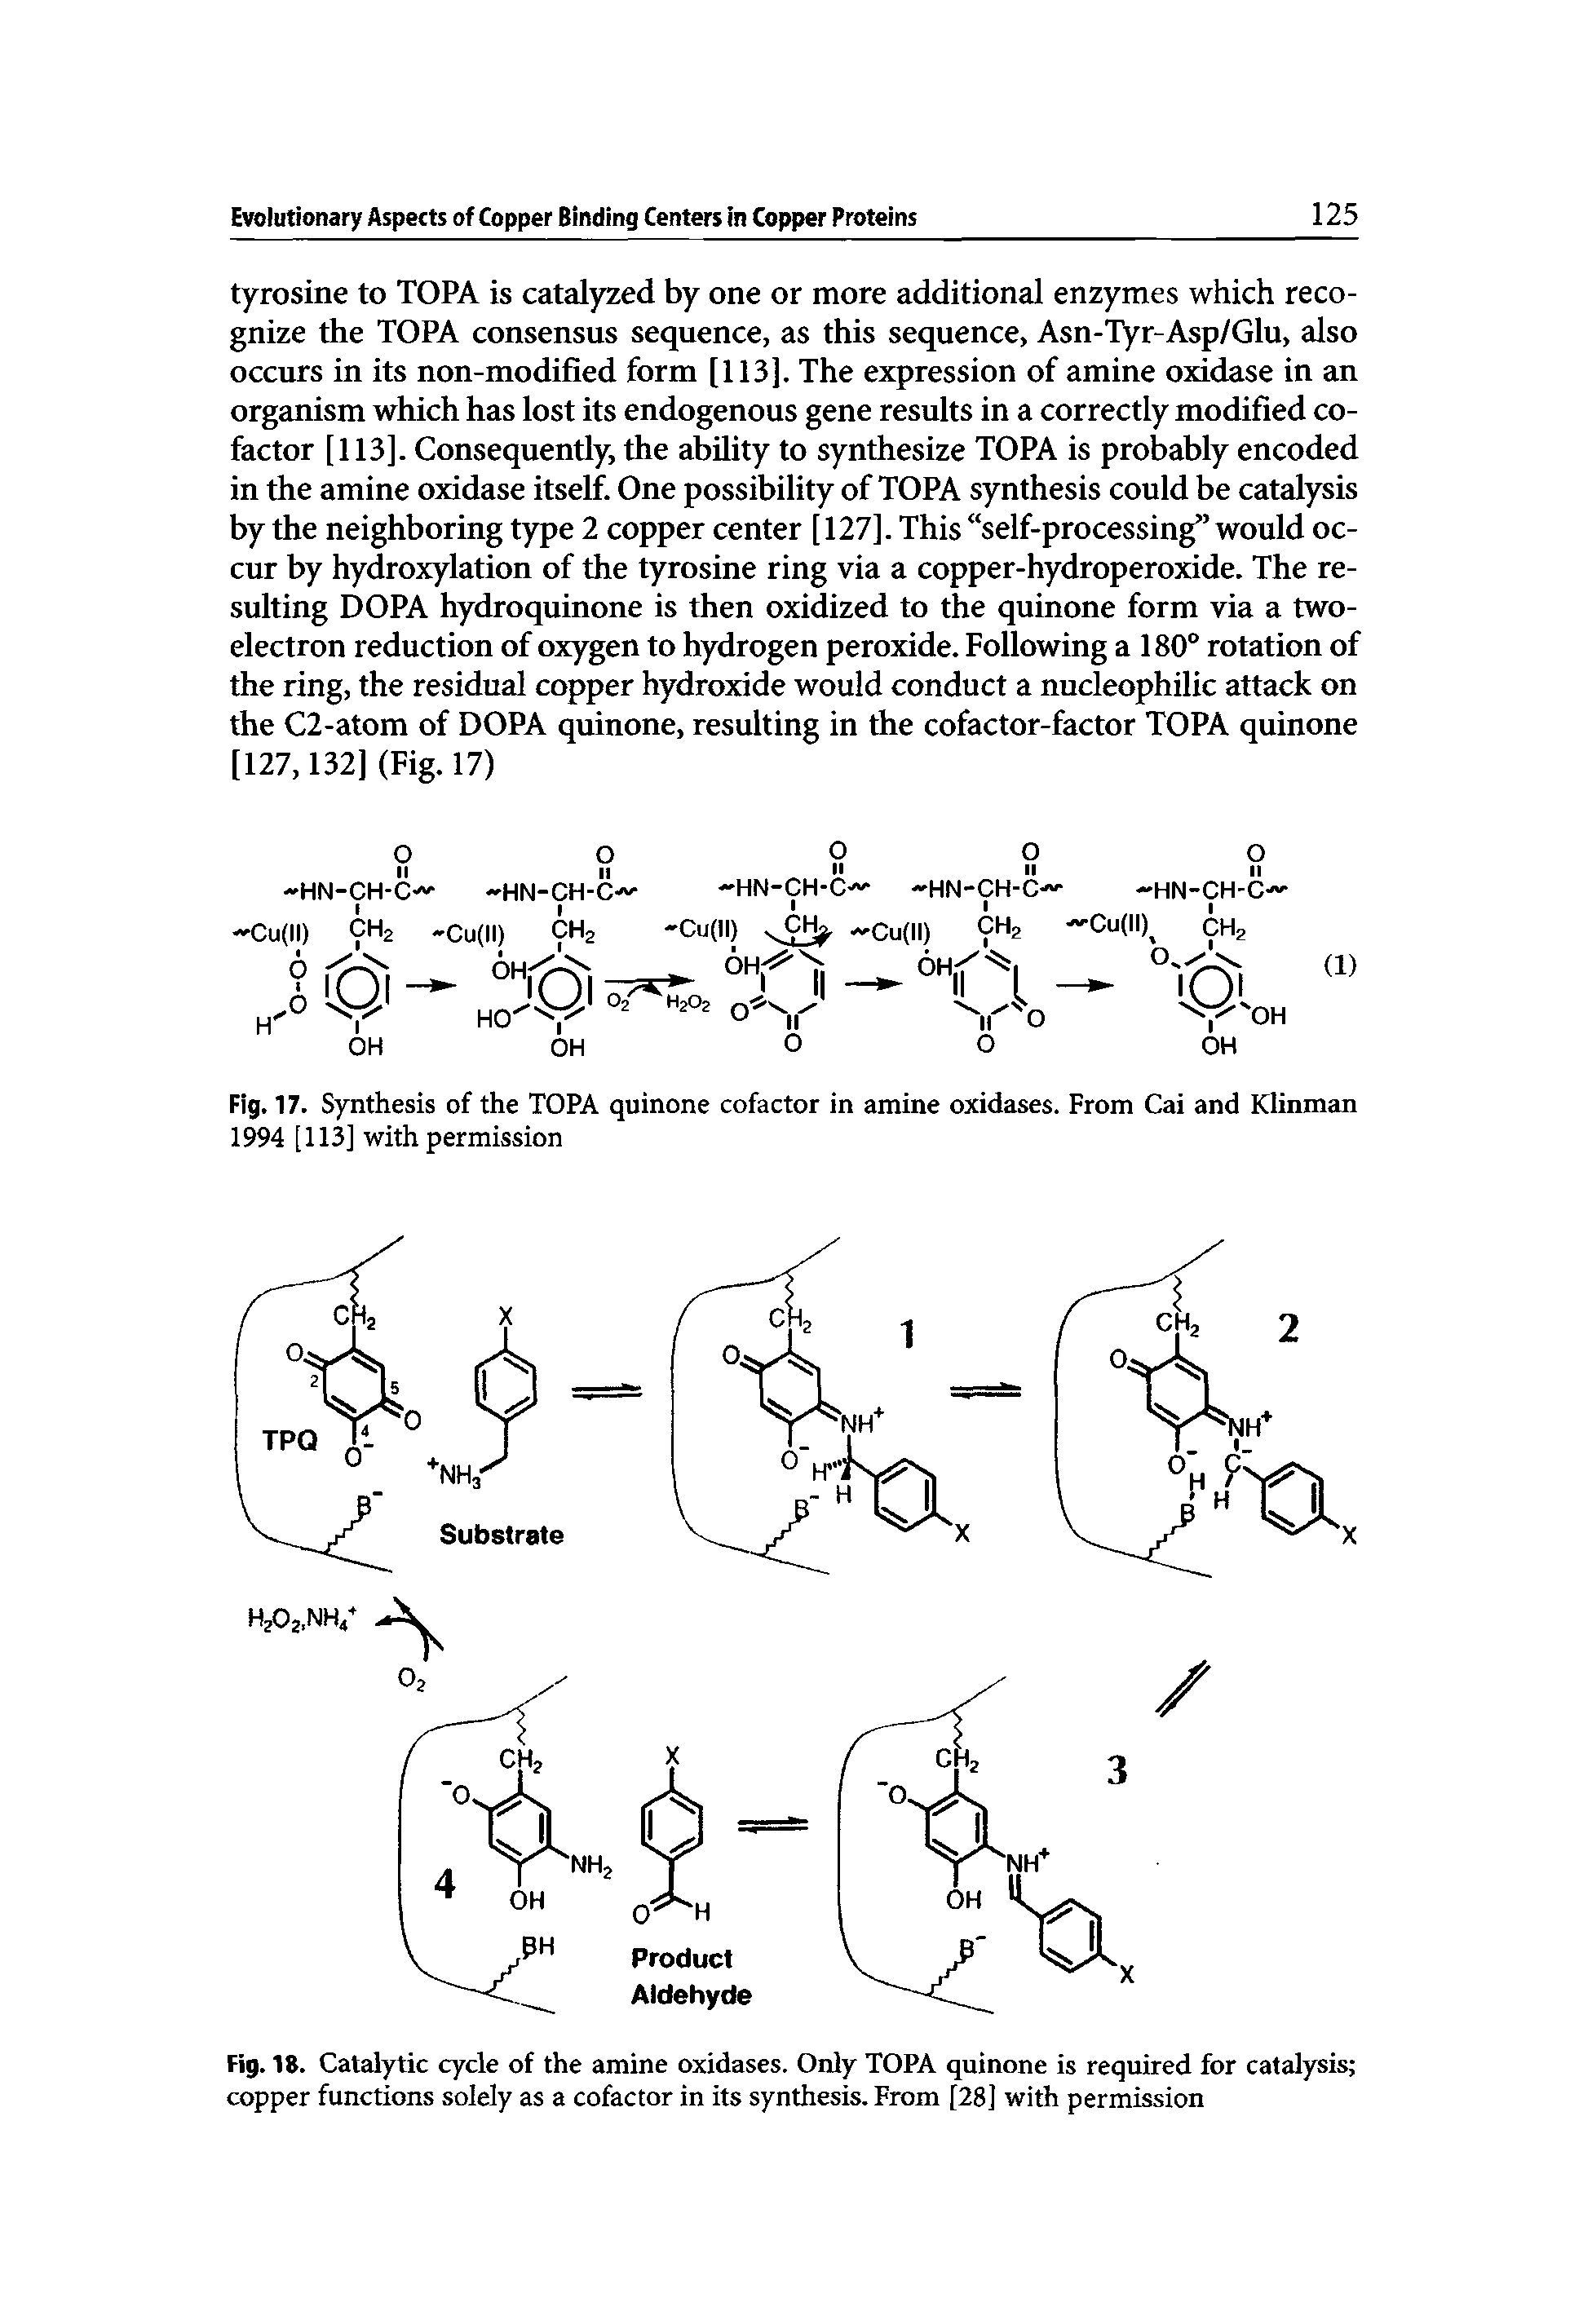 Fig. 17. Synthesis of the TOPA quinone cofactor in amine oxidases. From Cai and Klinman 1994 [113] with permission...